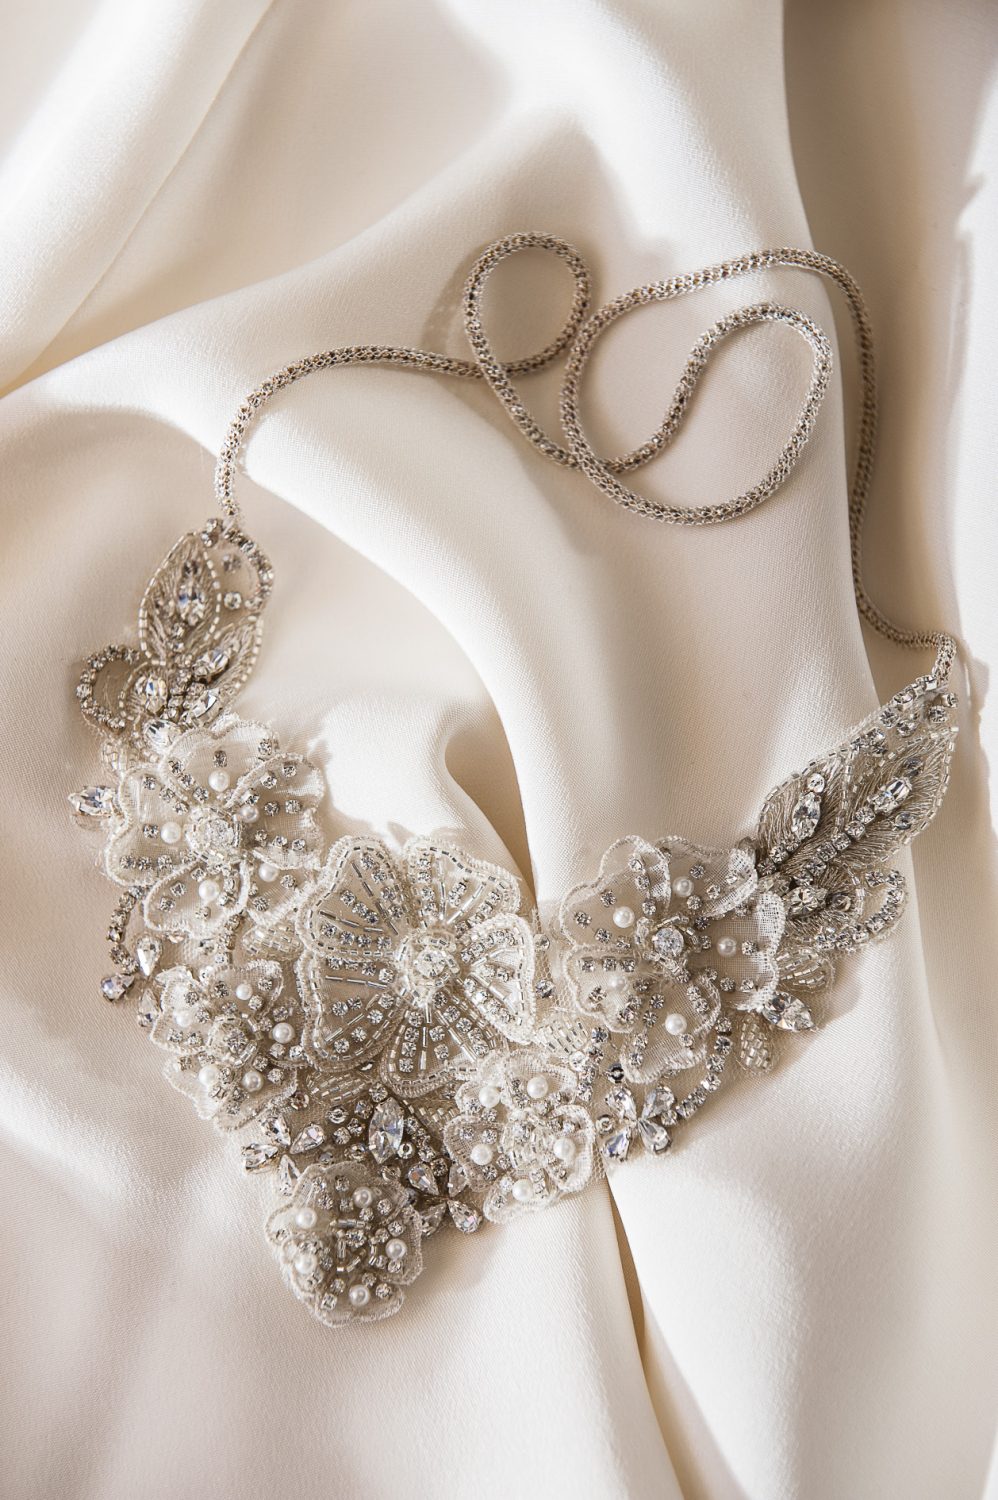 Ivy & Aster ‘Beautiful Girl’ beaded and appliqué necklace, £175, Froufrou Bridal Boutique, Tunbridge Wells 01892 541381 www.froufroubride.co.uk